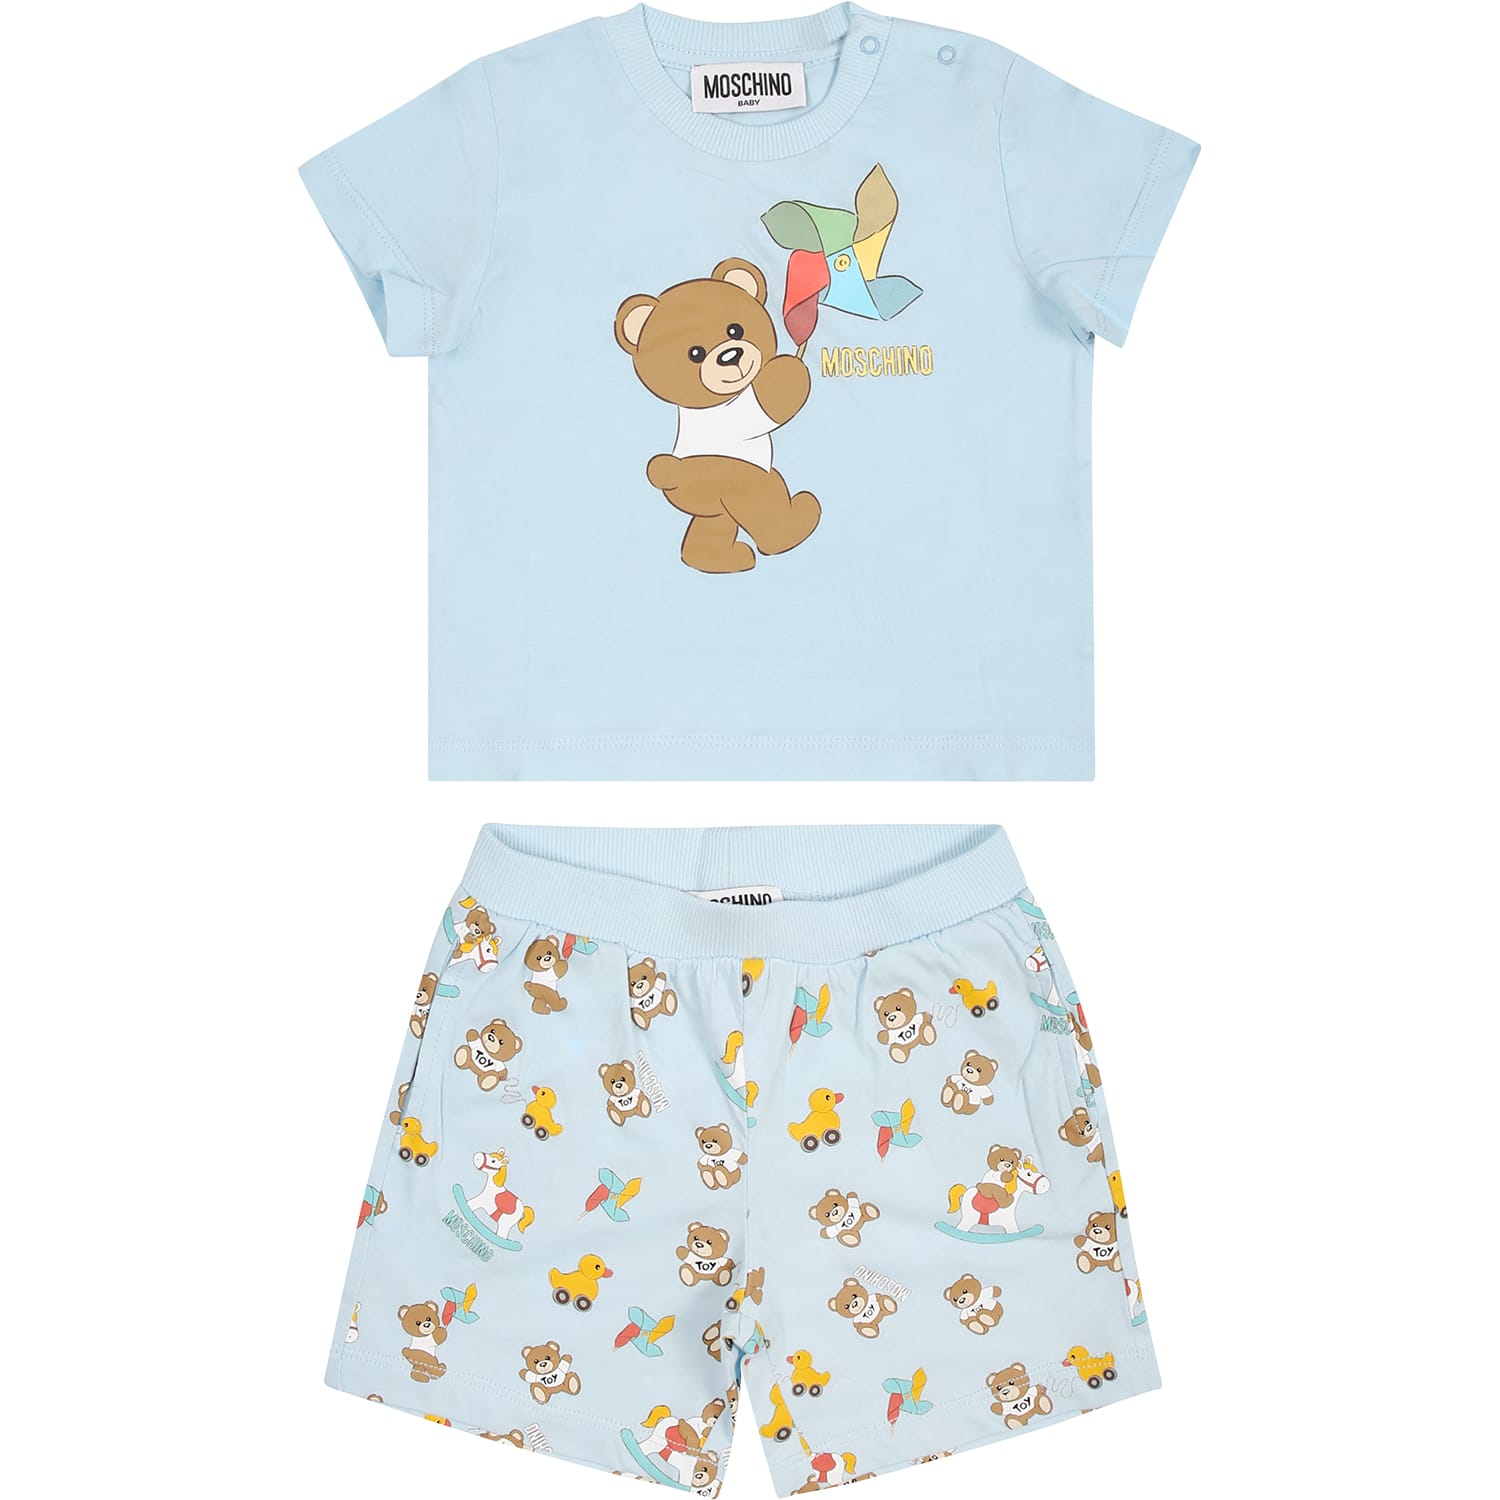 Moschino Light Blue Set For Baby Boy With Teddy Bear And Pinwheel